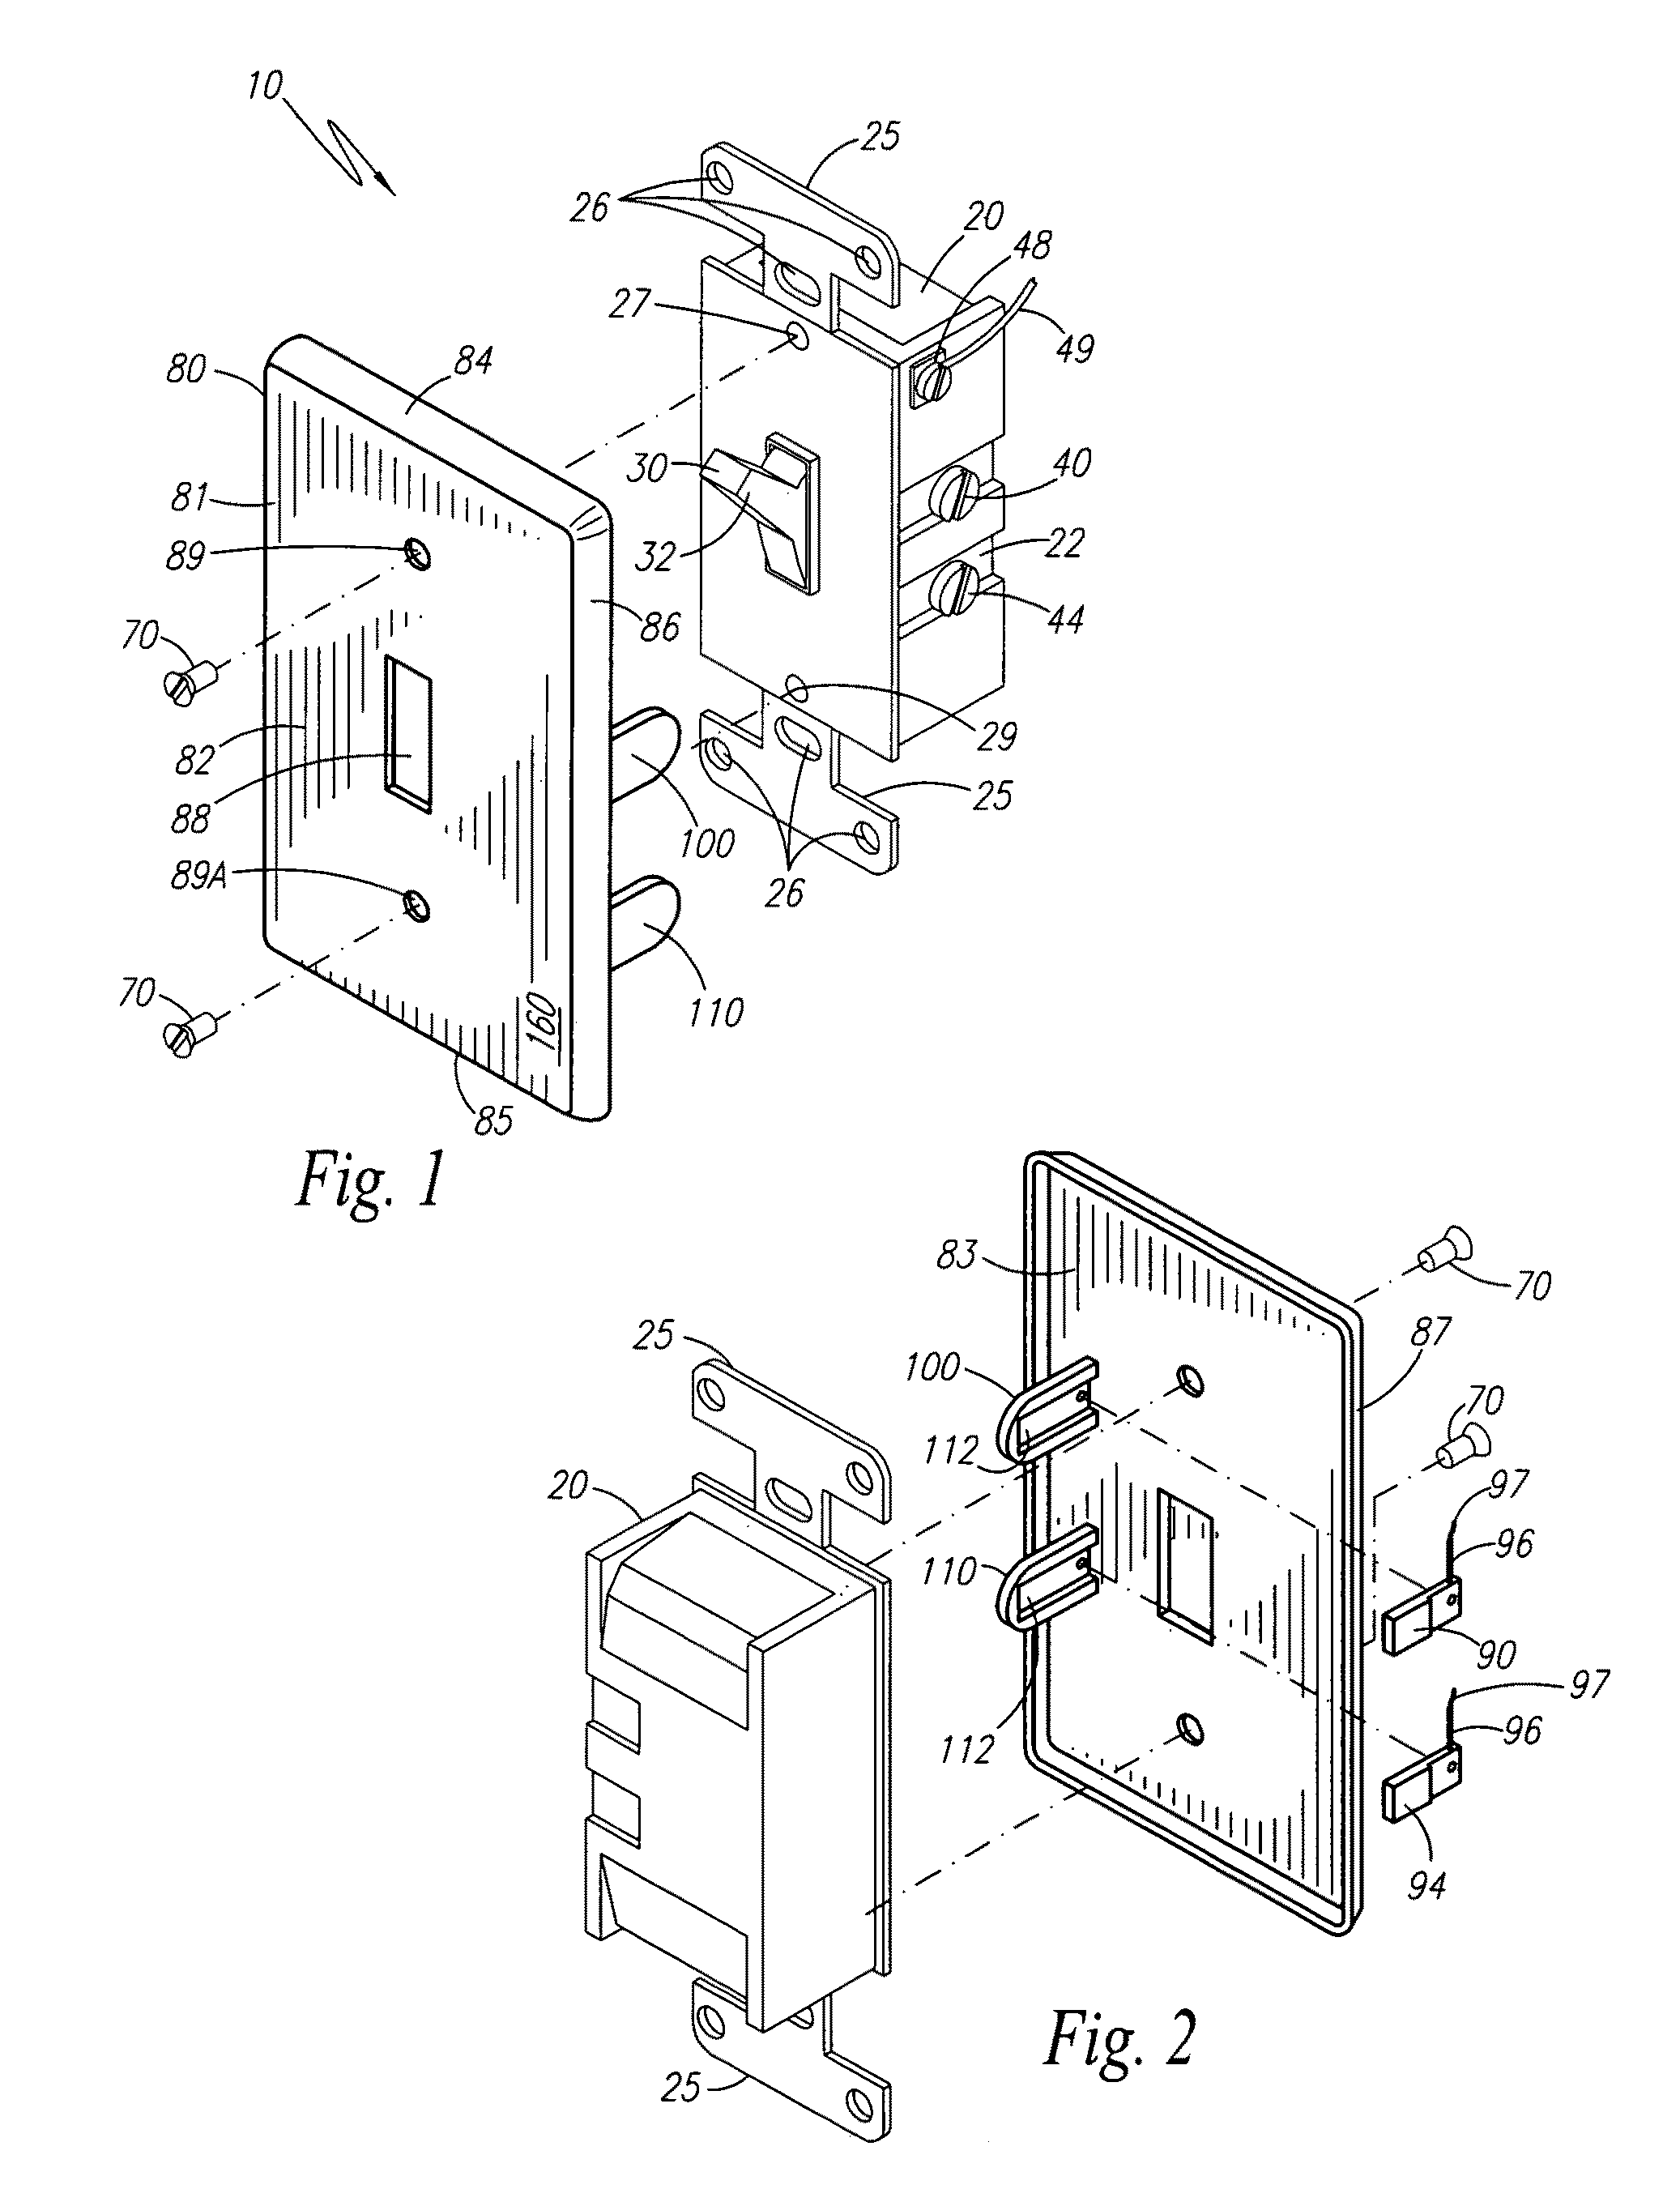 Electric function module assembly